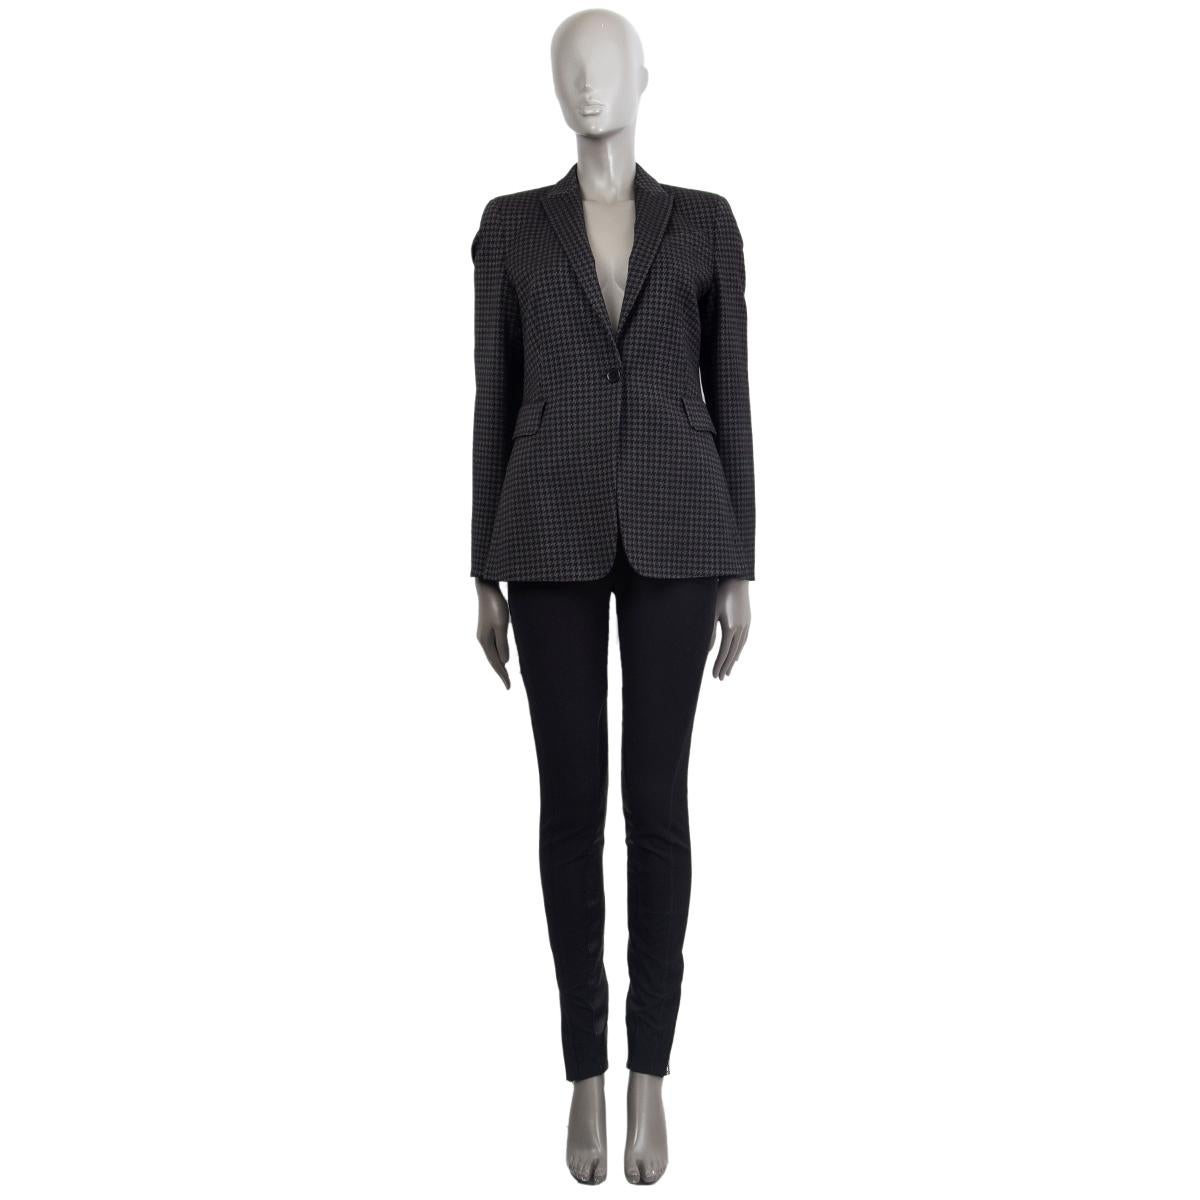 100% authentic AKRIS punto classic blazer in grey and black wool (73%) viscose (19%) polyamide (7%) elastane (1%) with a houndstooth design, peak collar, two flap pockets and one chest pocket. Lined in black fabric polyurethane (60%) polyester